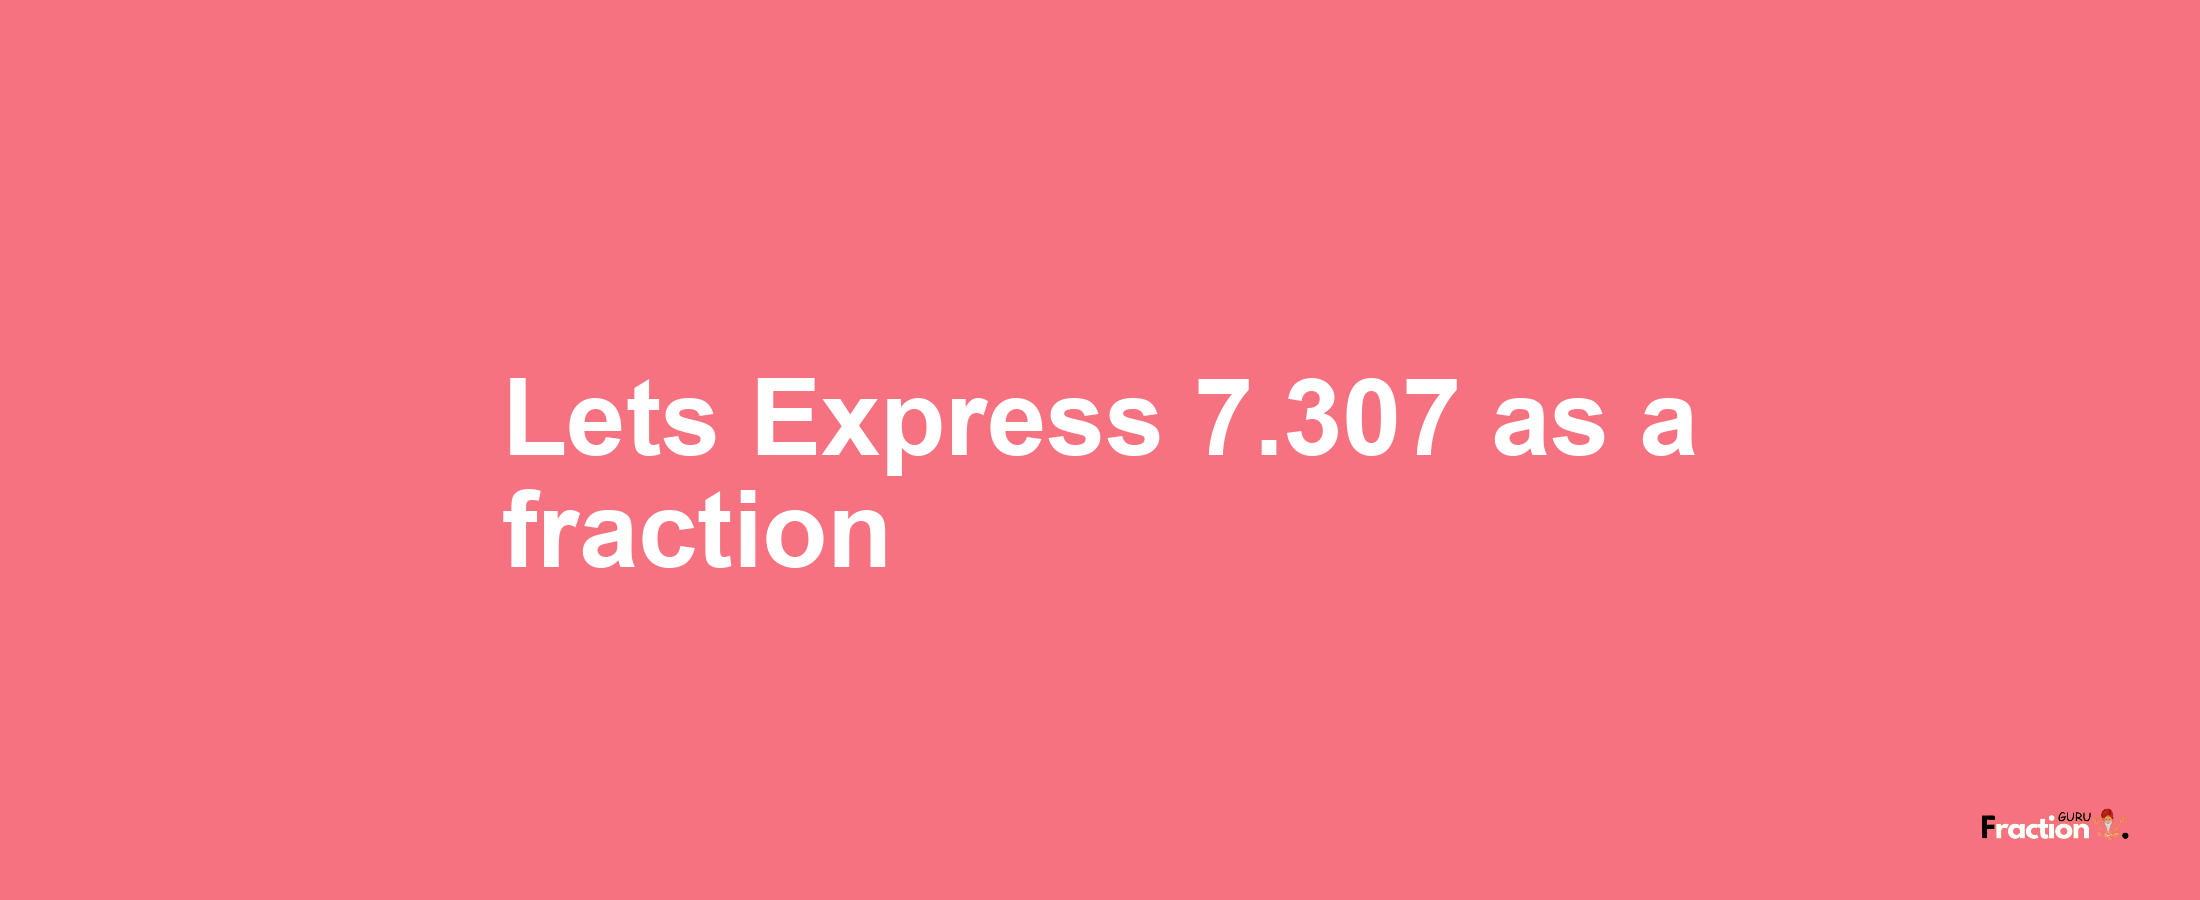 Lets Express 7.307 as afraction